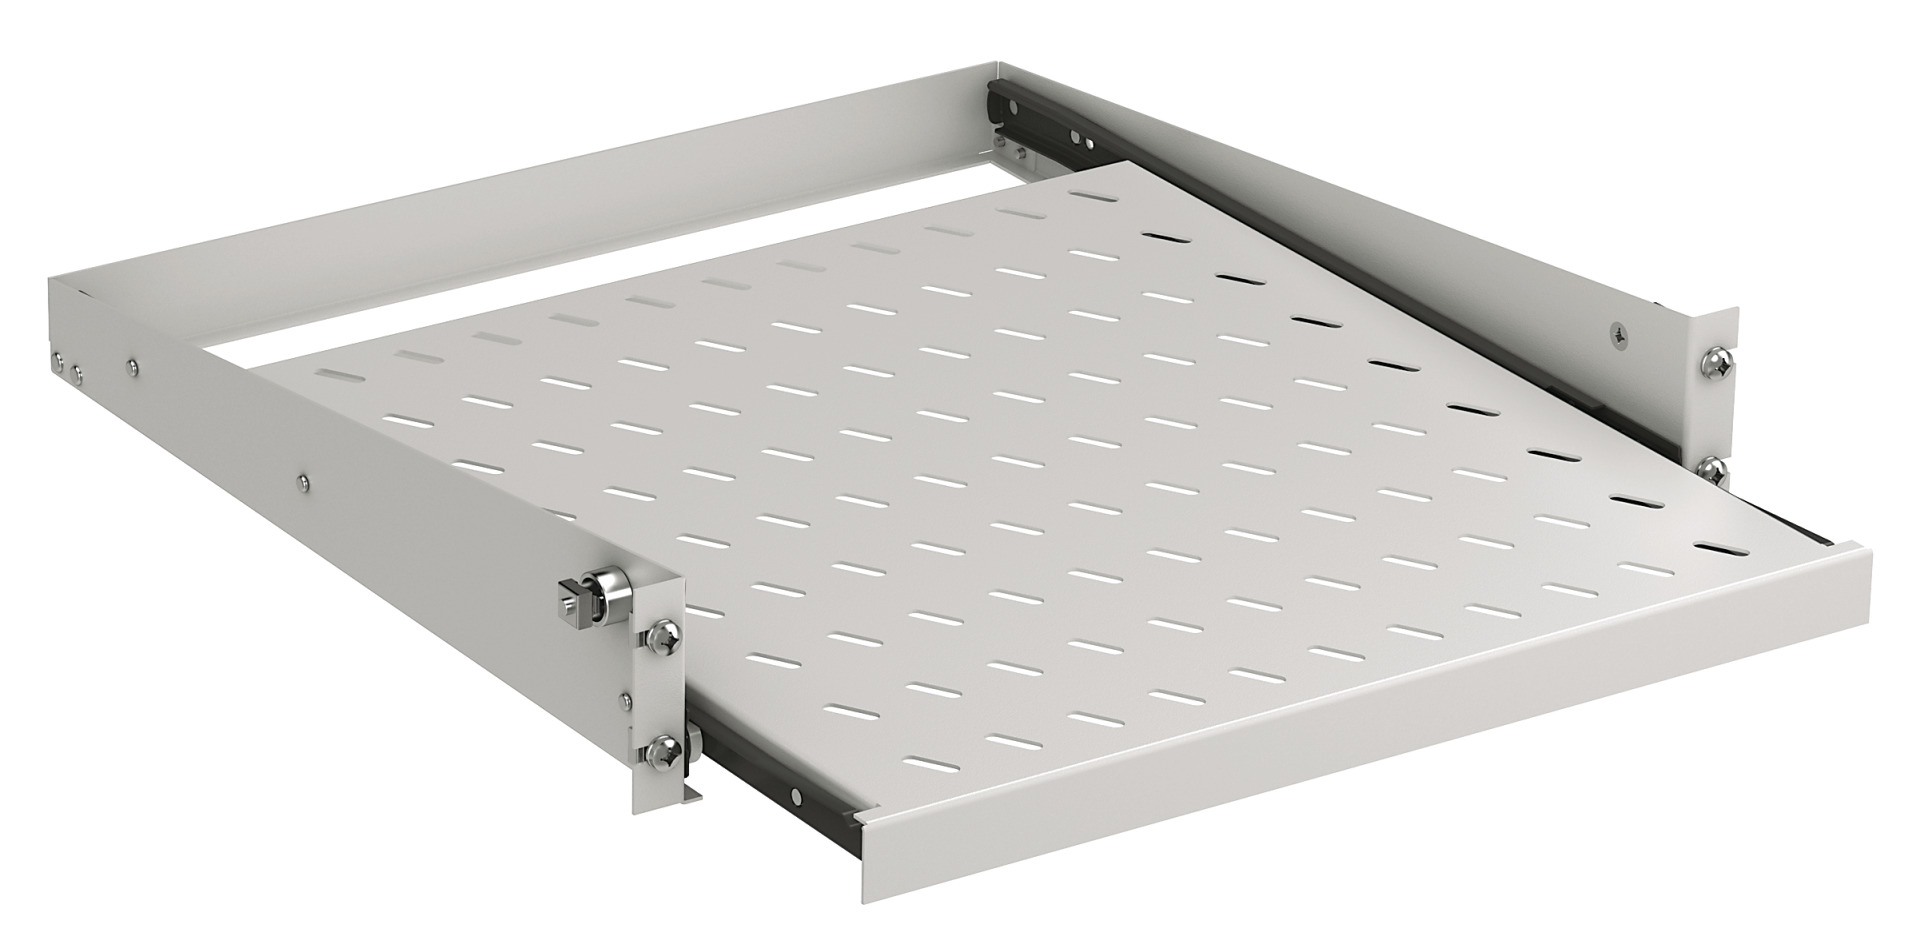 19" 2U Pull-Out Shelf, D=455 mm, Front Mounting, 20 kg, RAL9005